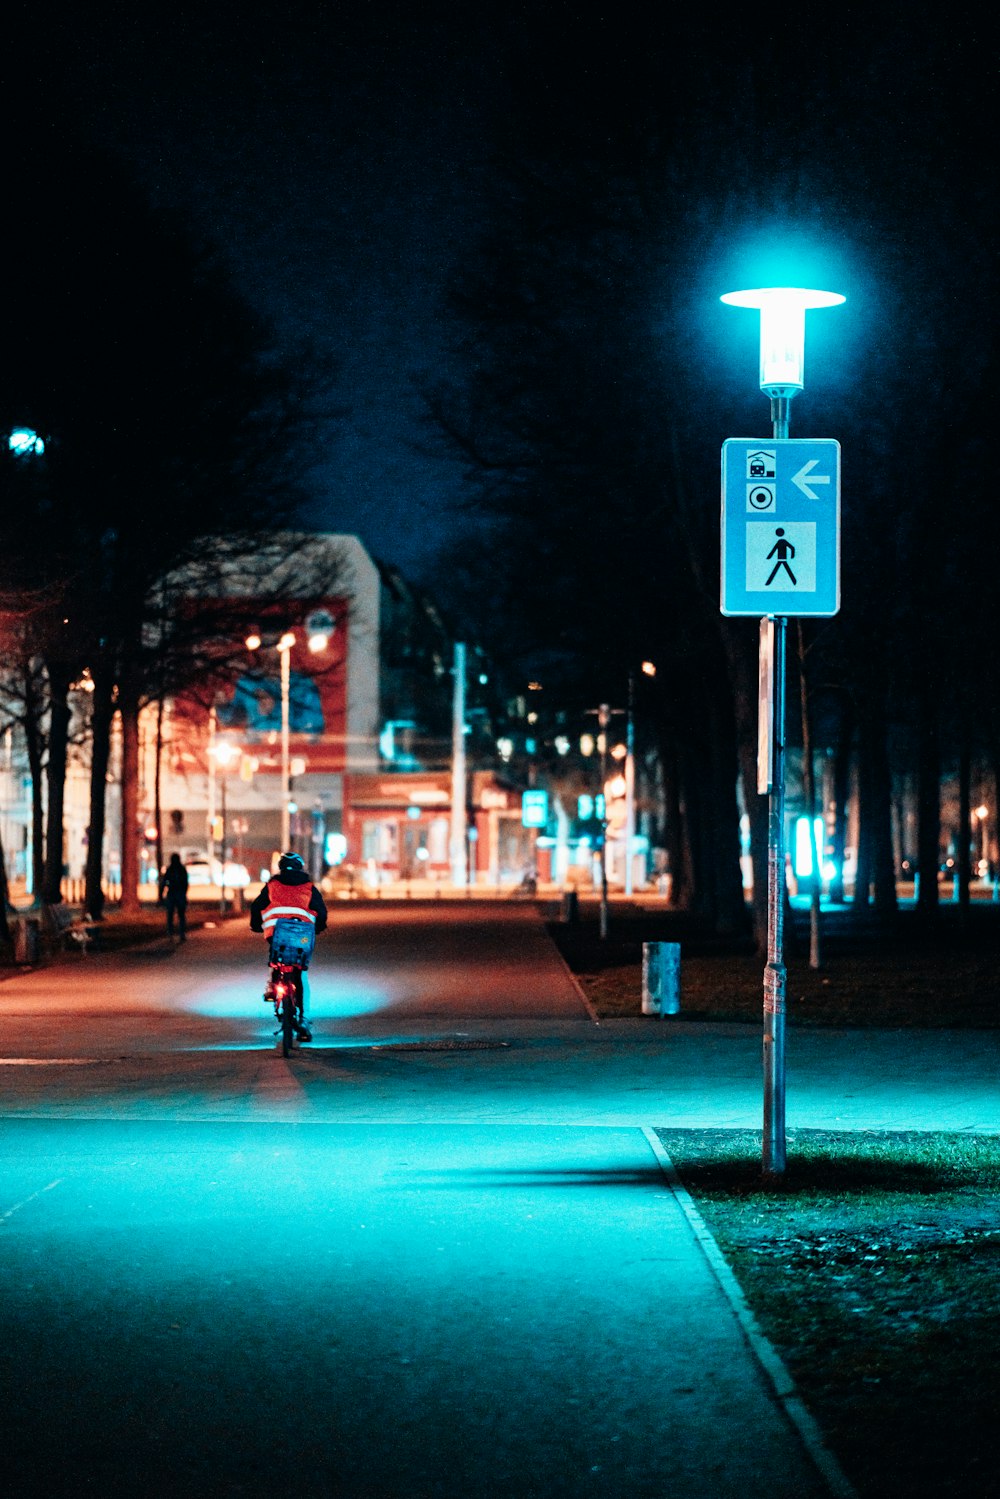 a person riding a bike down a street at night